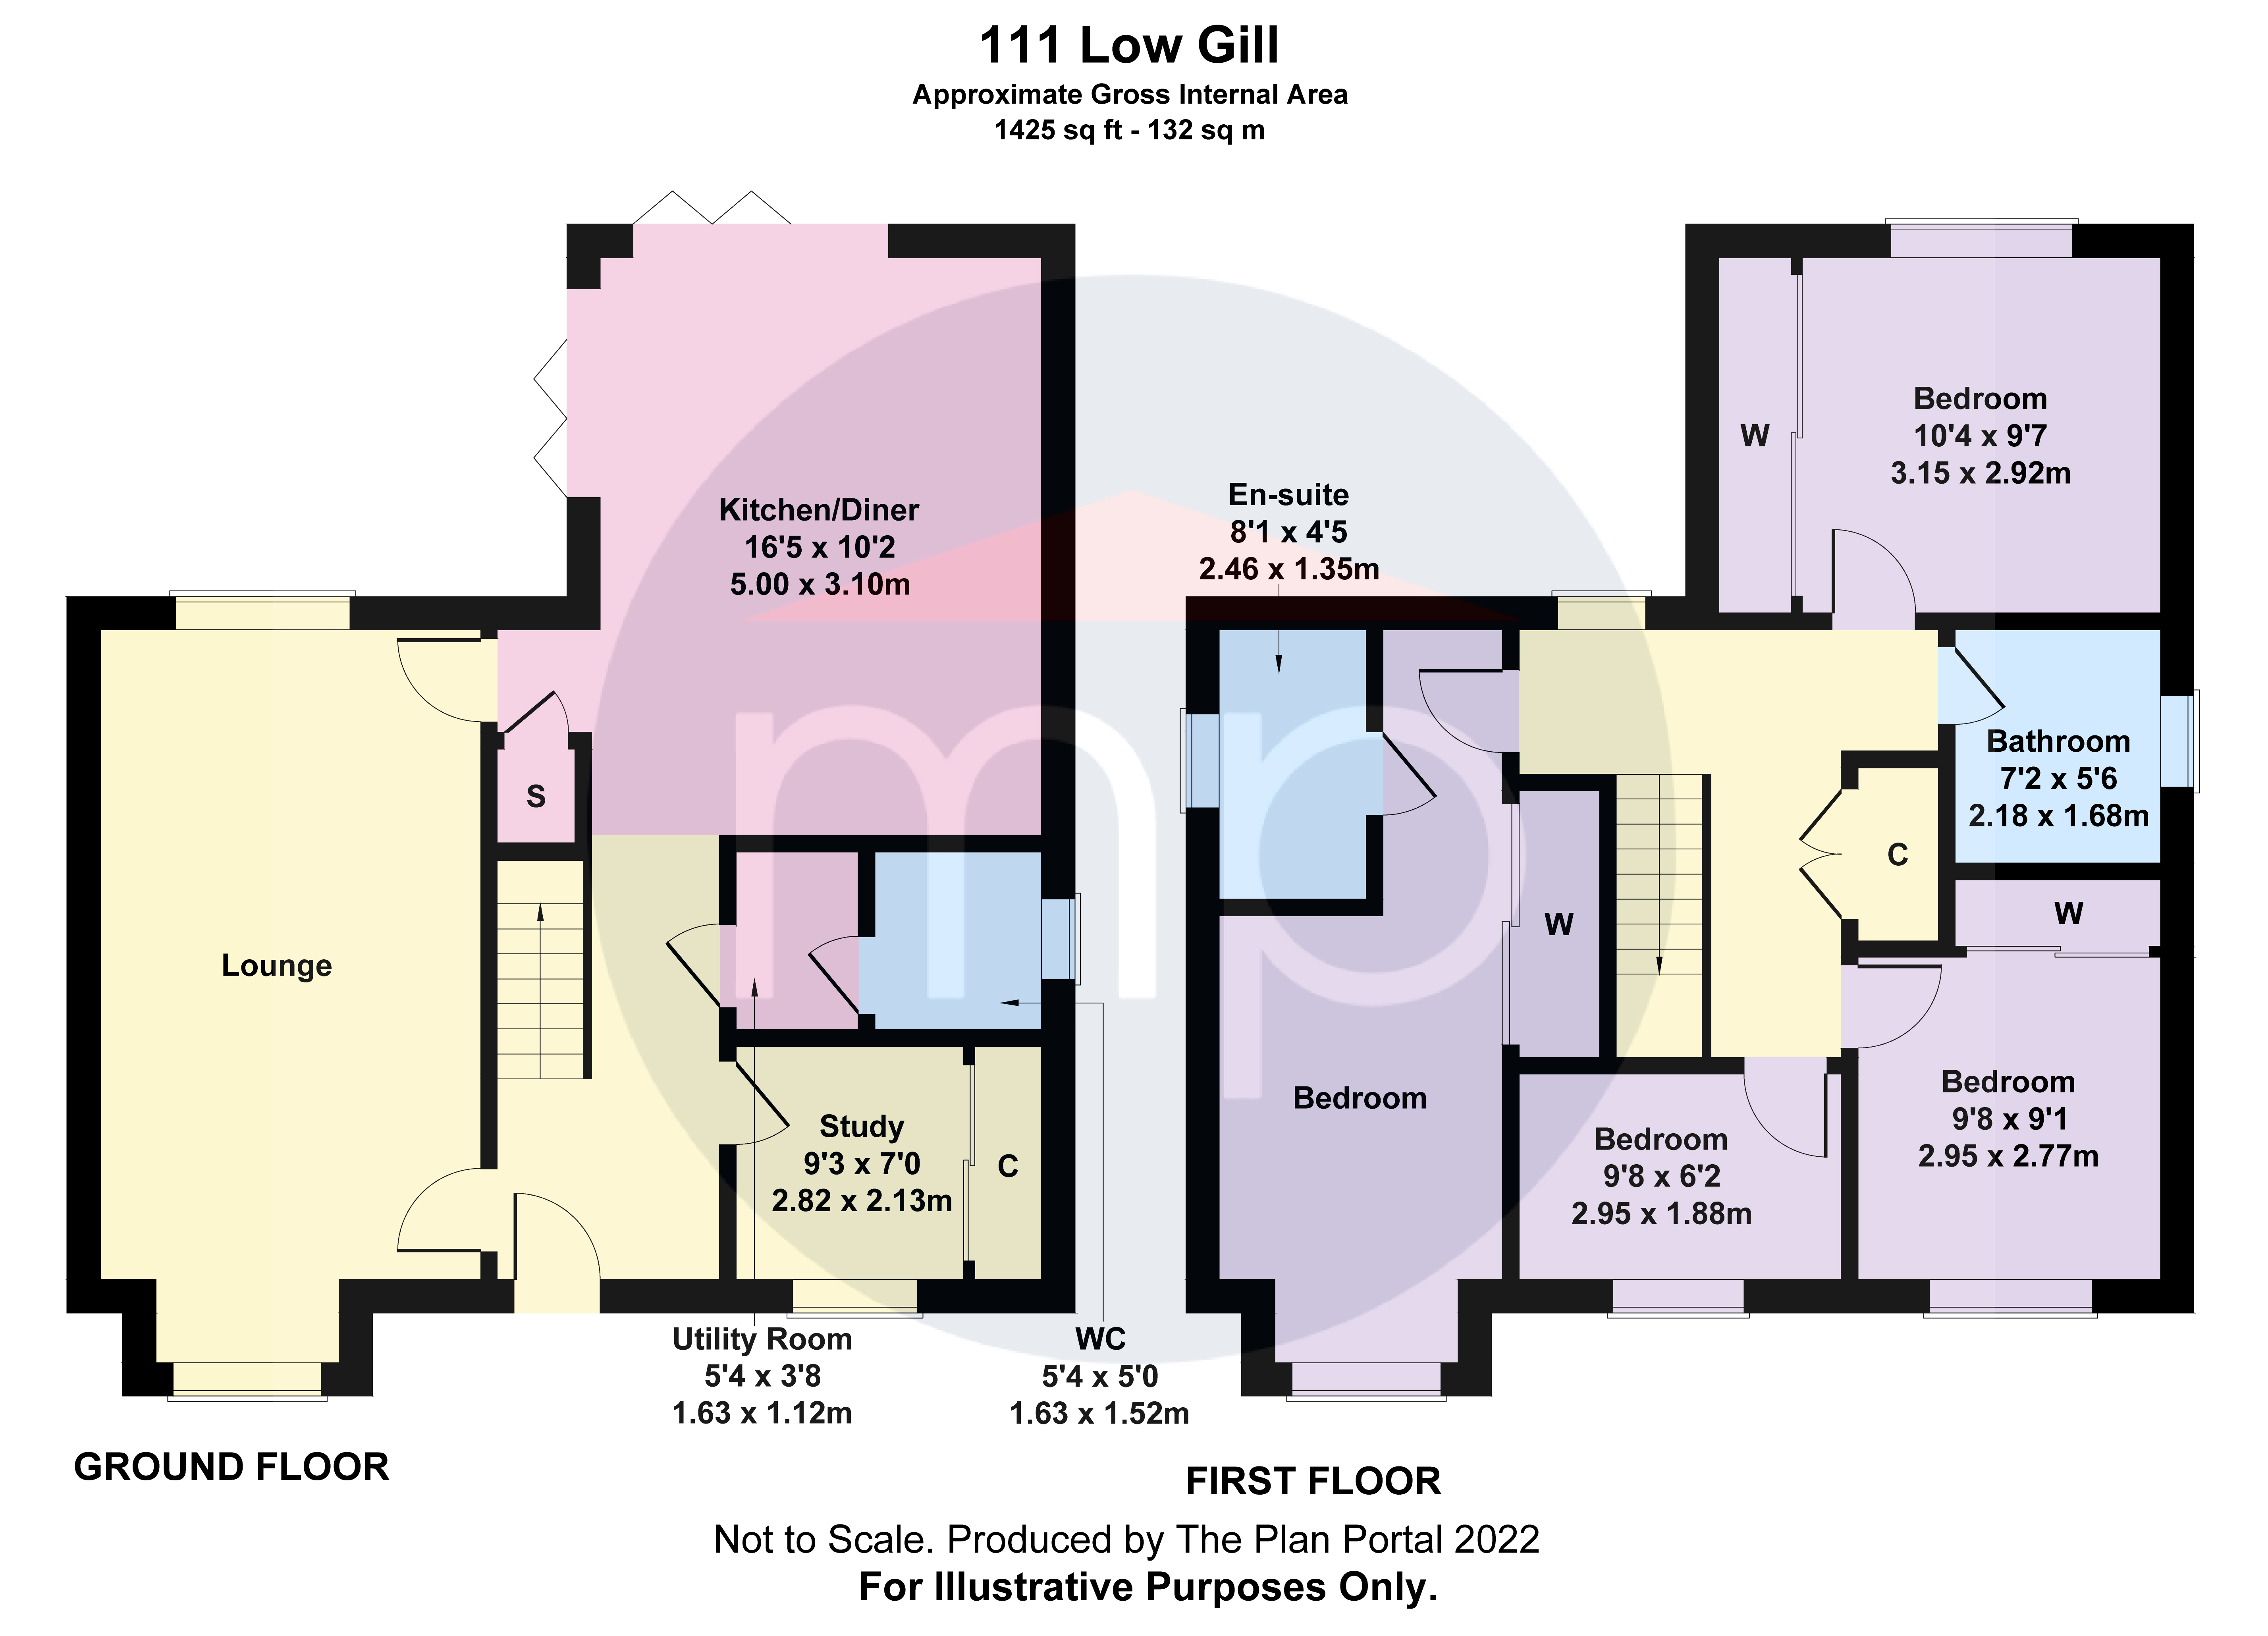 4 bed house for sale - Property floorplan